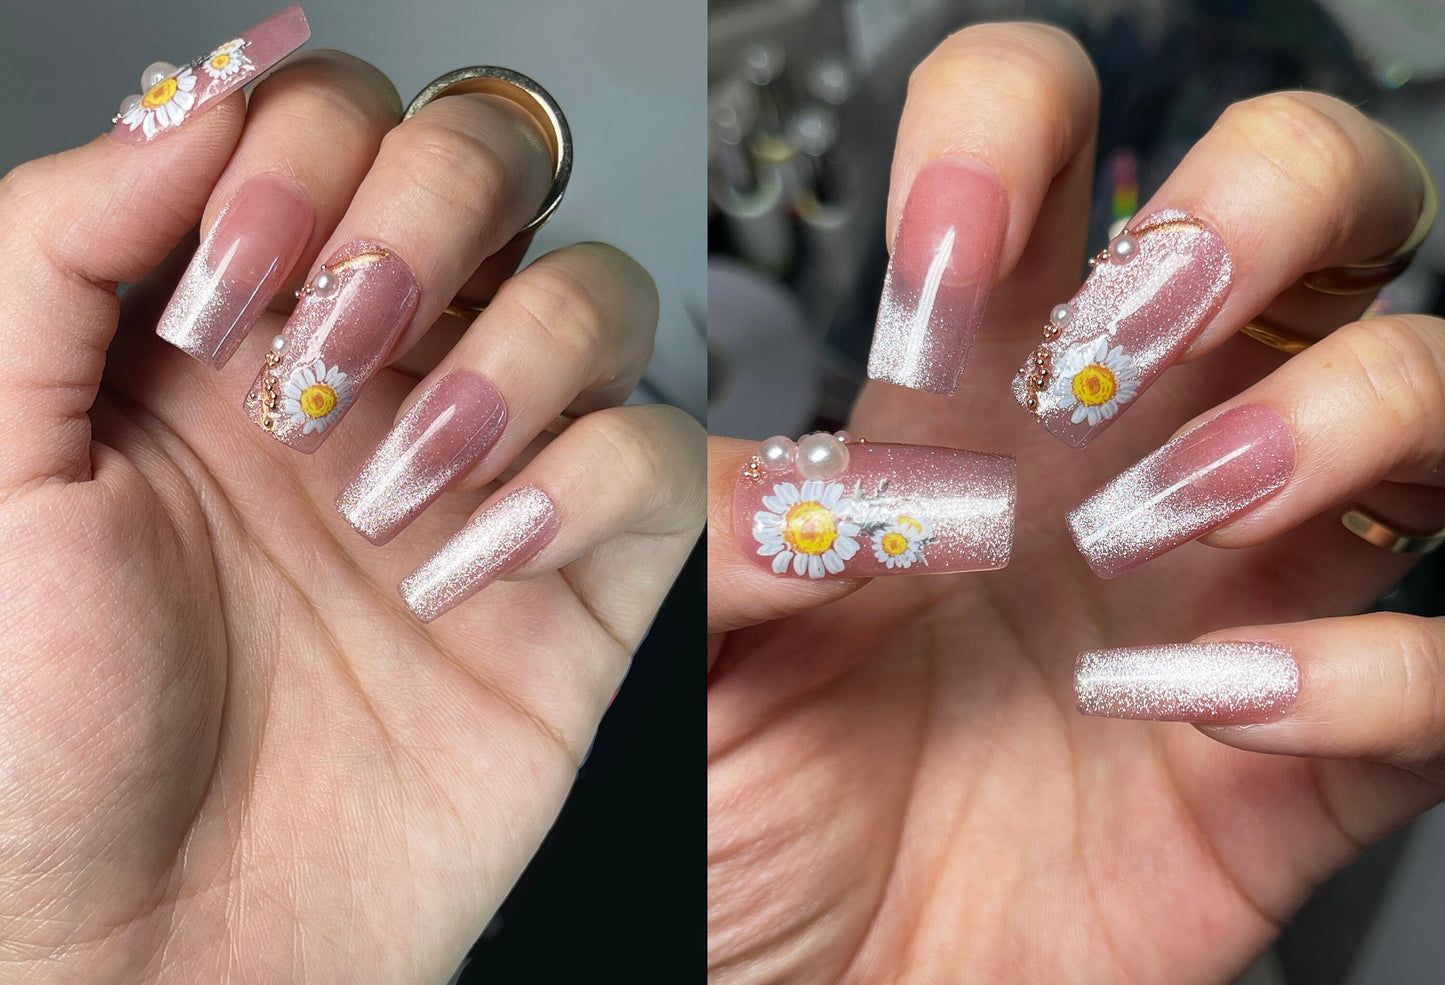 Daisy flower Nail Art Sticker Peel off daisies Stickers/ Chrysanthemum Oxeye daisy leaf Bouquet white flower Blossom Manicure Nail Supply